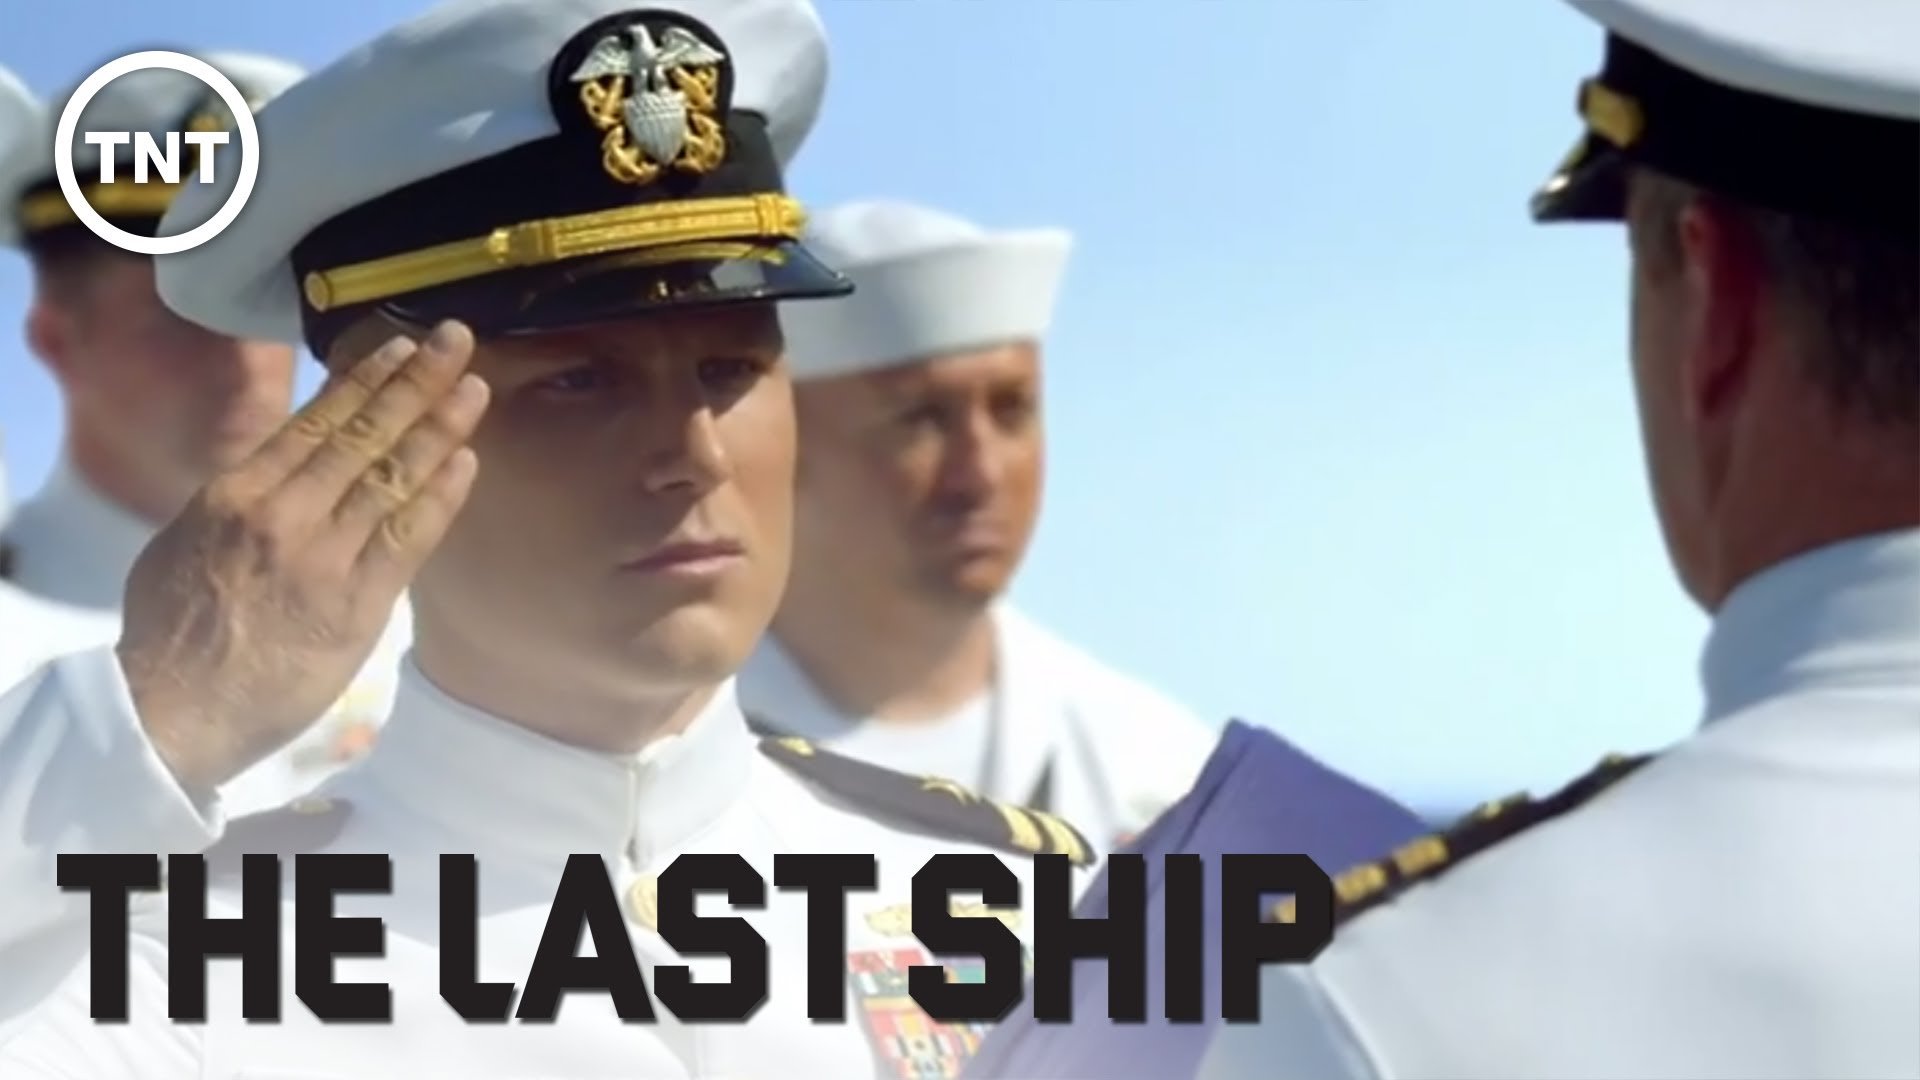 THE LAST SHIP military navy series action drama apocalyptic sci fi